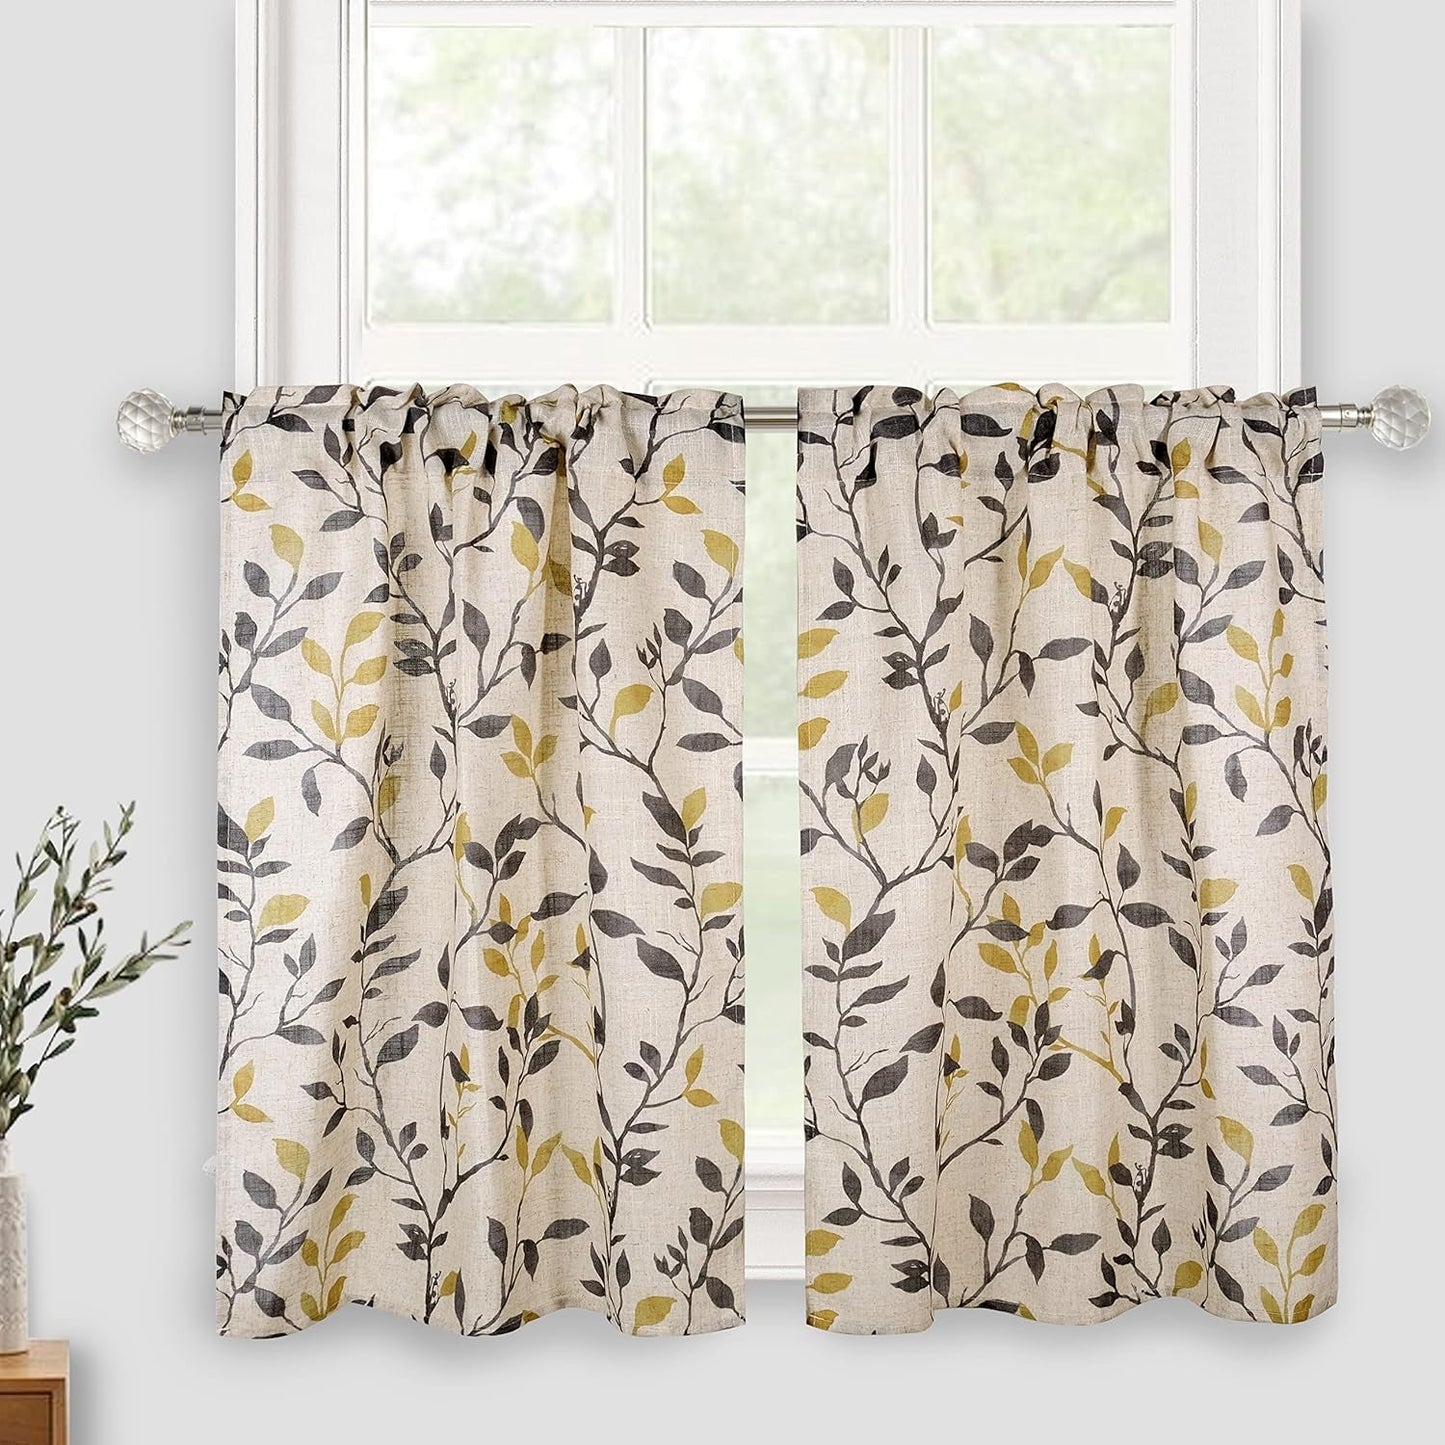 Linen Kitchen Valance, Tree Leaves Printed Window Curtain Valances for Bathroom Bedroom Living Room Farmhouse Decor Rod Pocket Short Cafe Curtains 54 by 14 Inches Gray